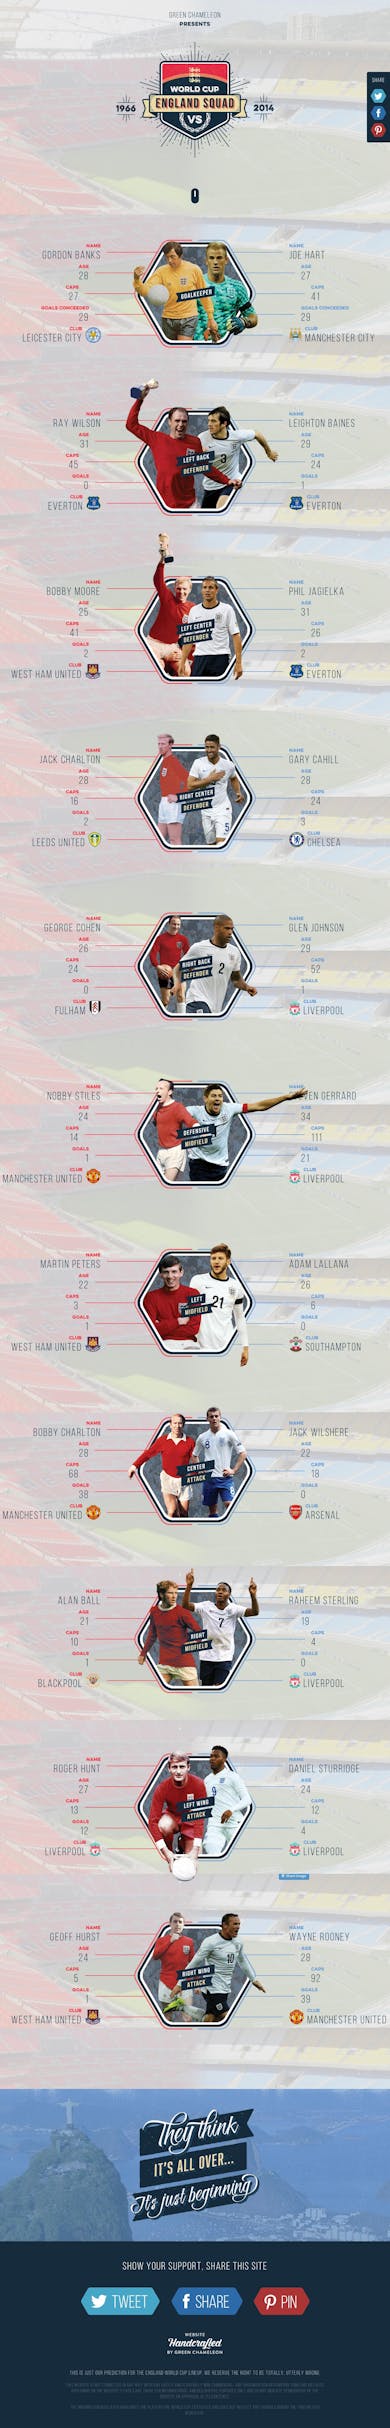 England’s World Cup Squad – 1966 vs 2014 Thumbnail Preview